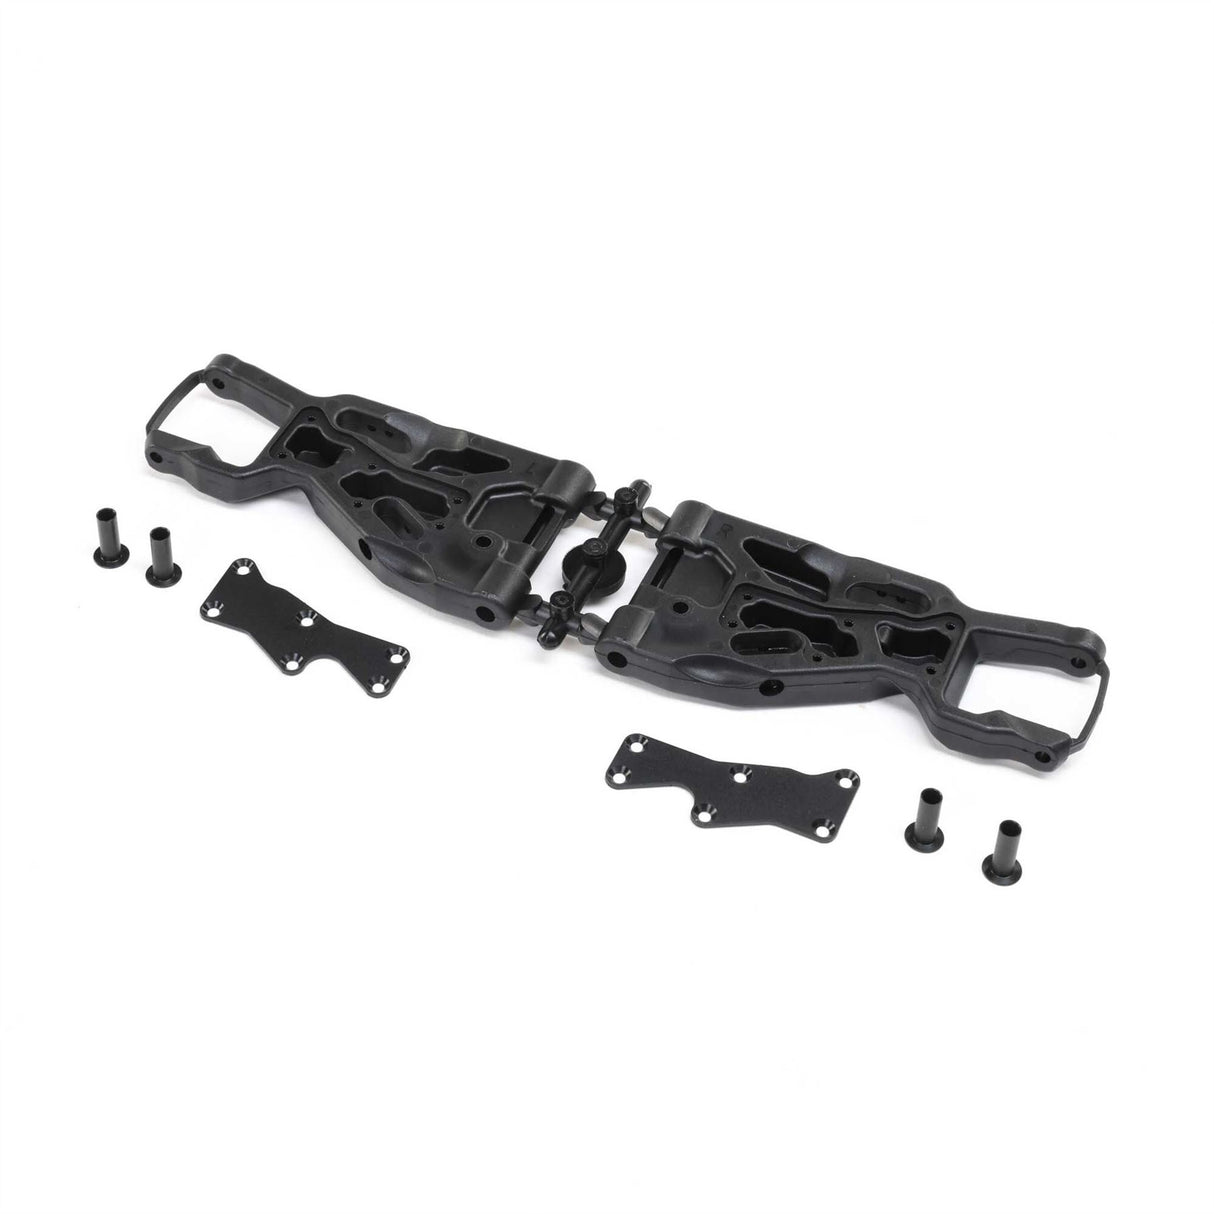 TLR Front Arm Set with Inserts: 8X, 8XE 2.0